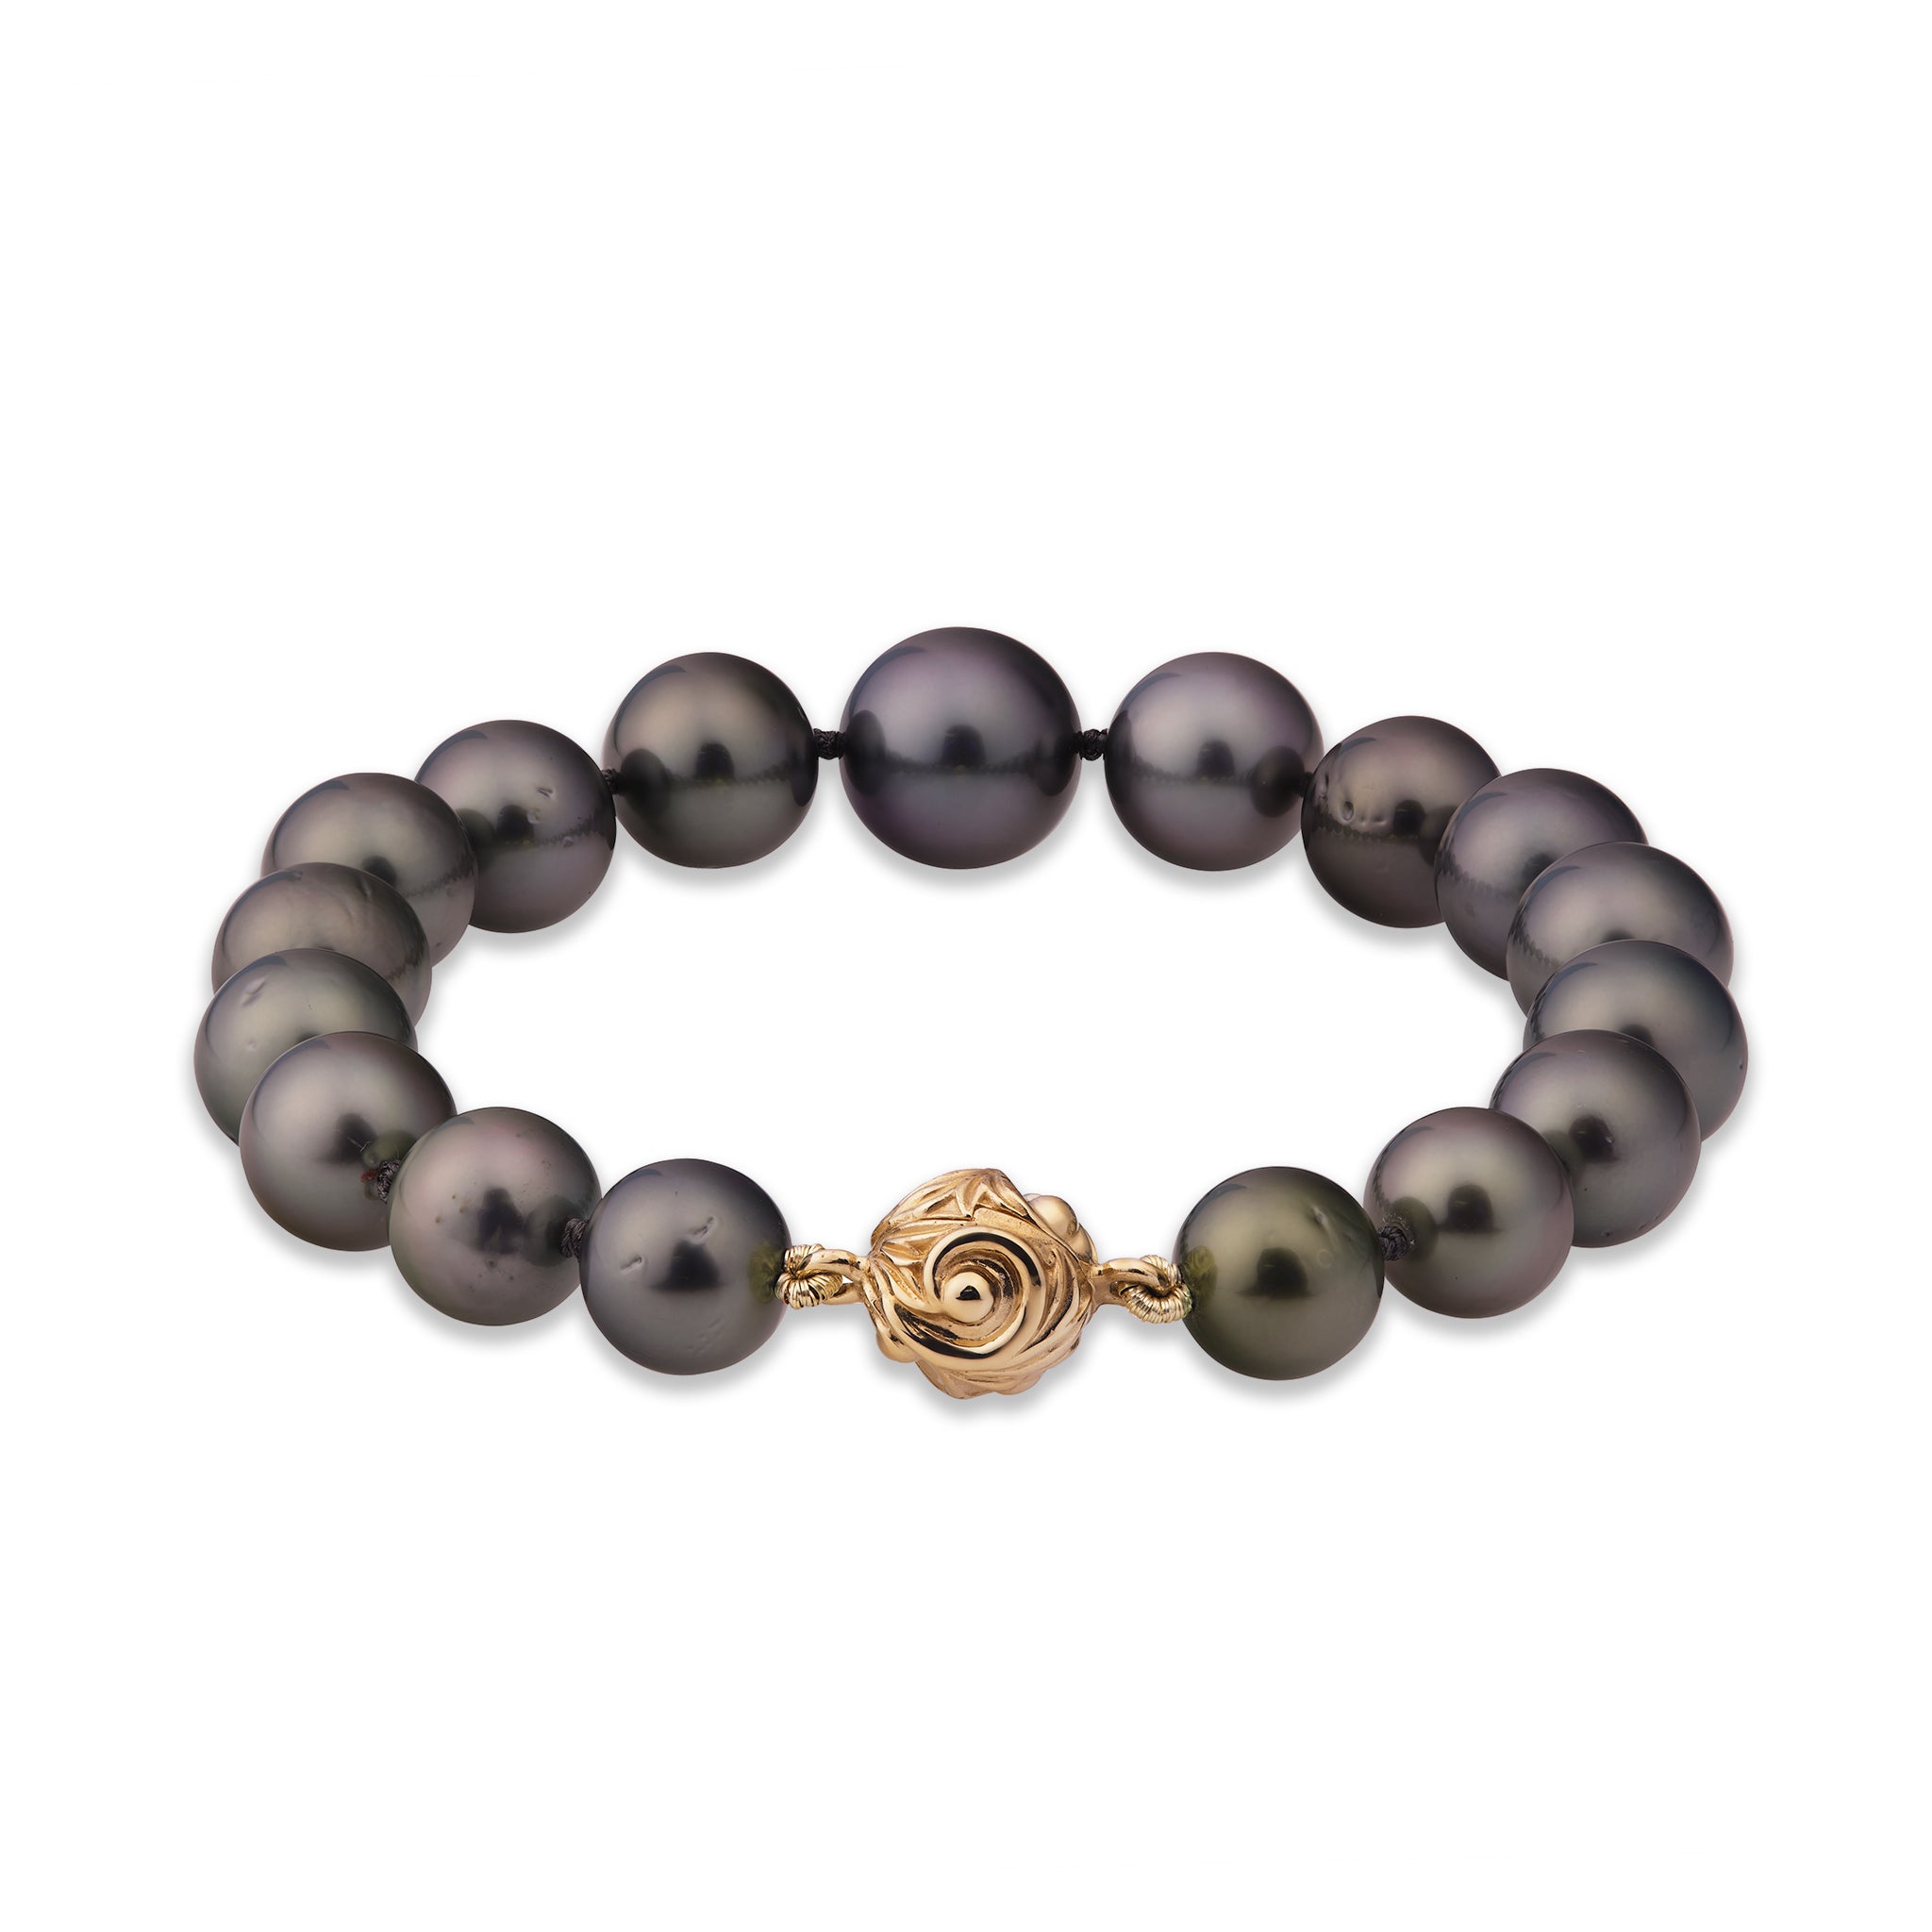 7.78-8 Tahitian Black Pearl Bracelet with Magnetic Gold Clasp